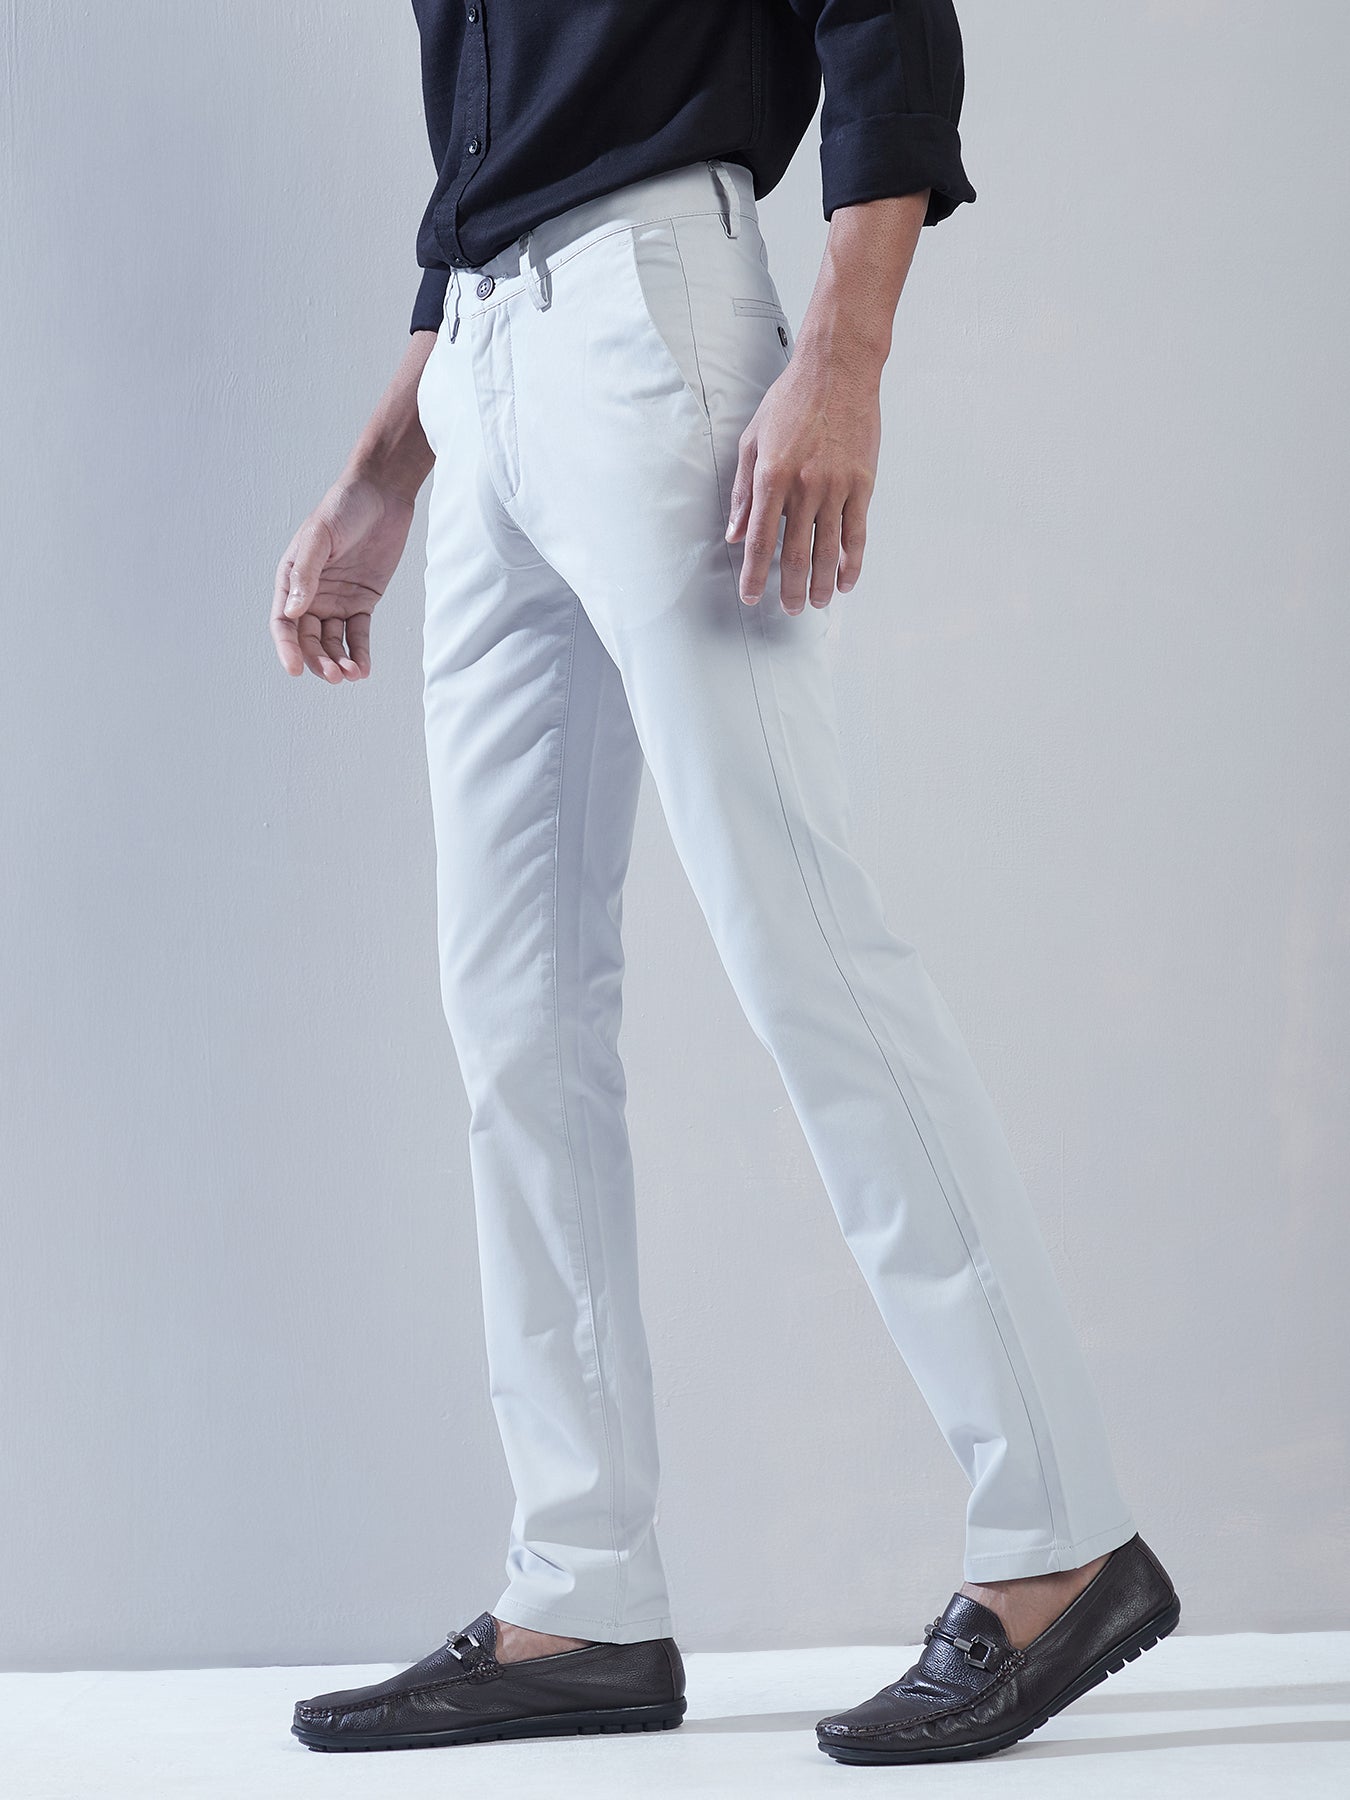 Cotton Stretch Off White Plain Ultra Slim Fit Flat Front Casual Trouser